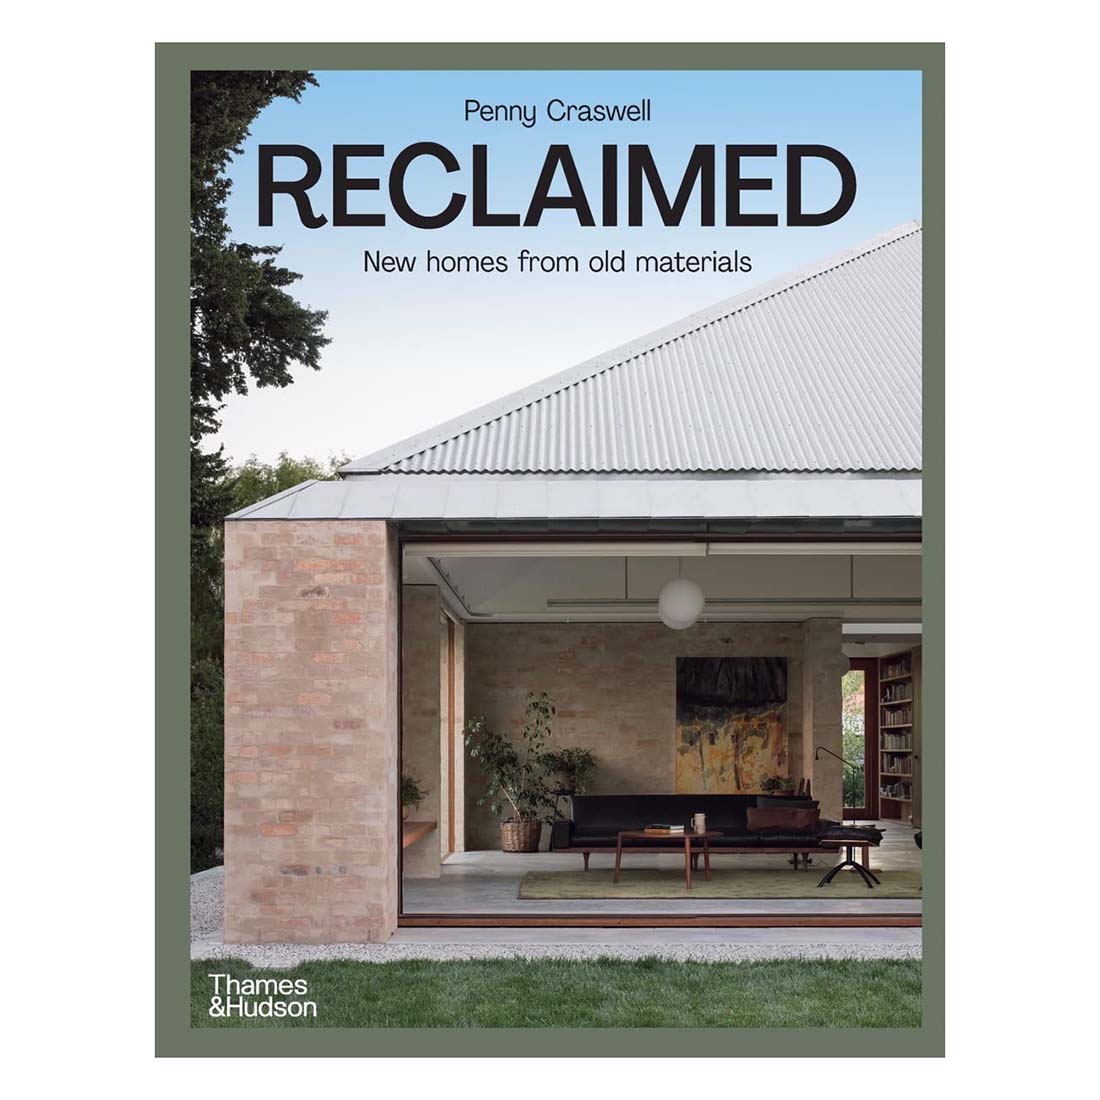 Reclaimed: New Homes from Old Materials